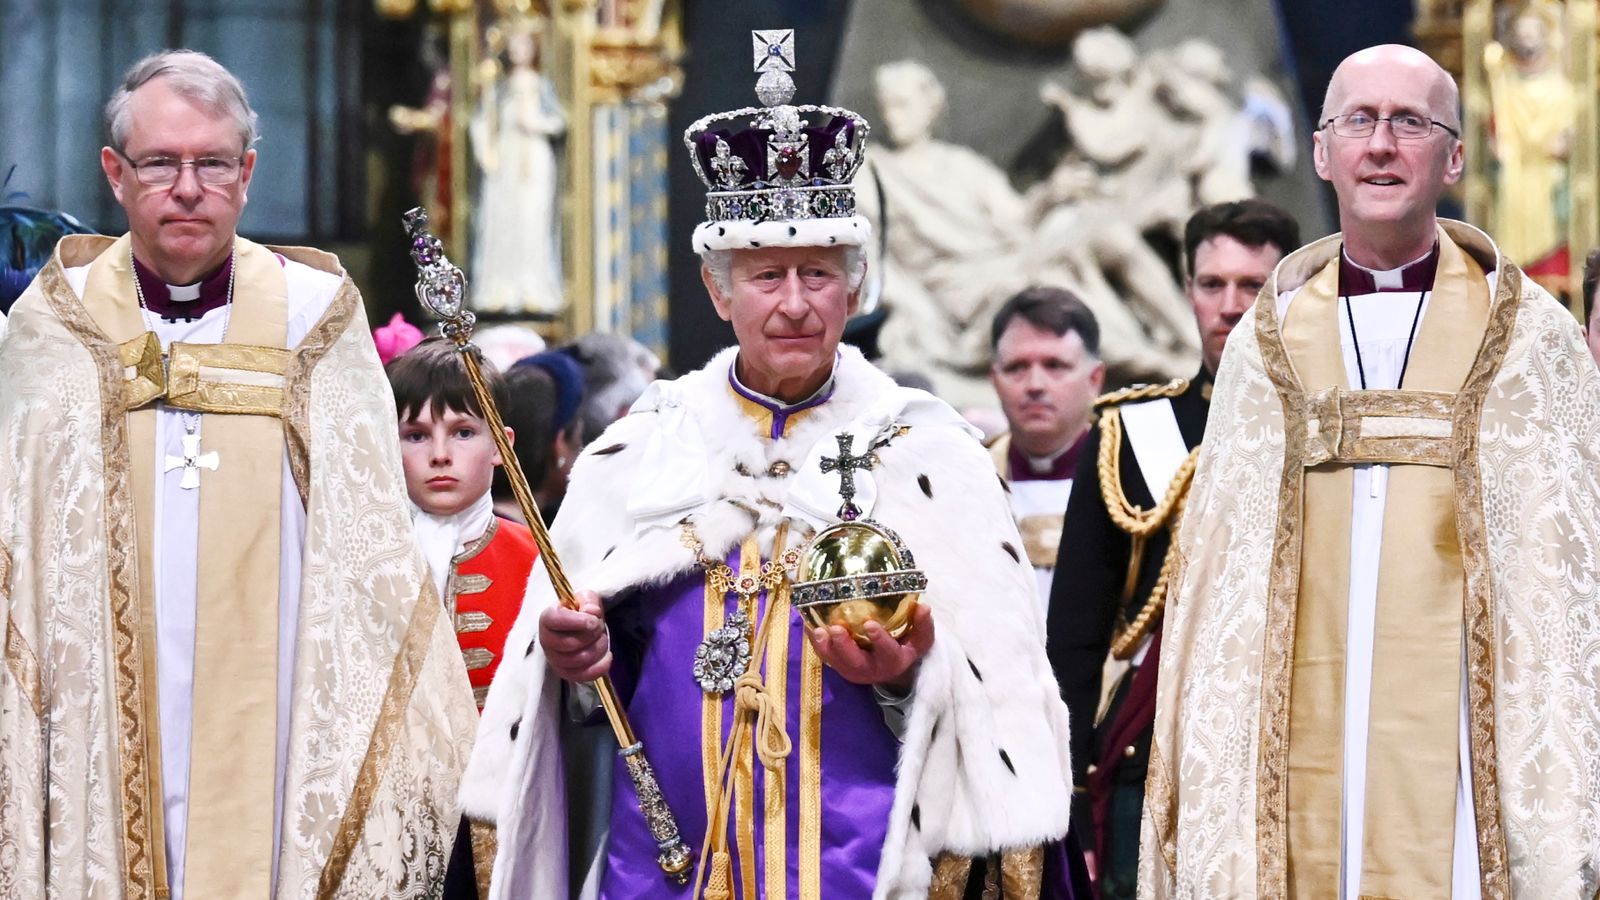 King's coronation: Eyewitness account from inside Westminster Abbey